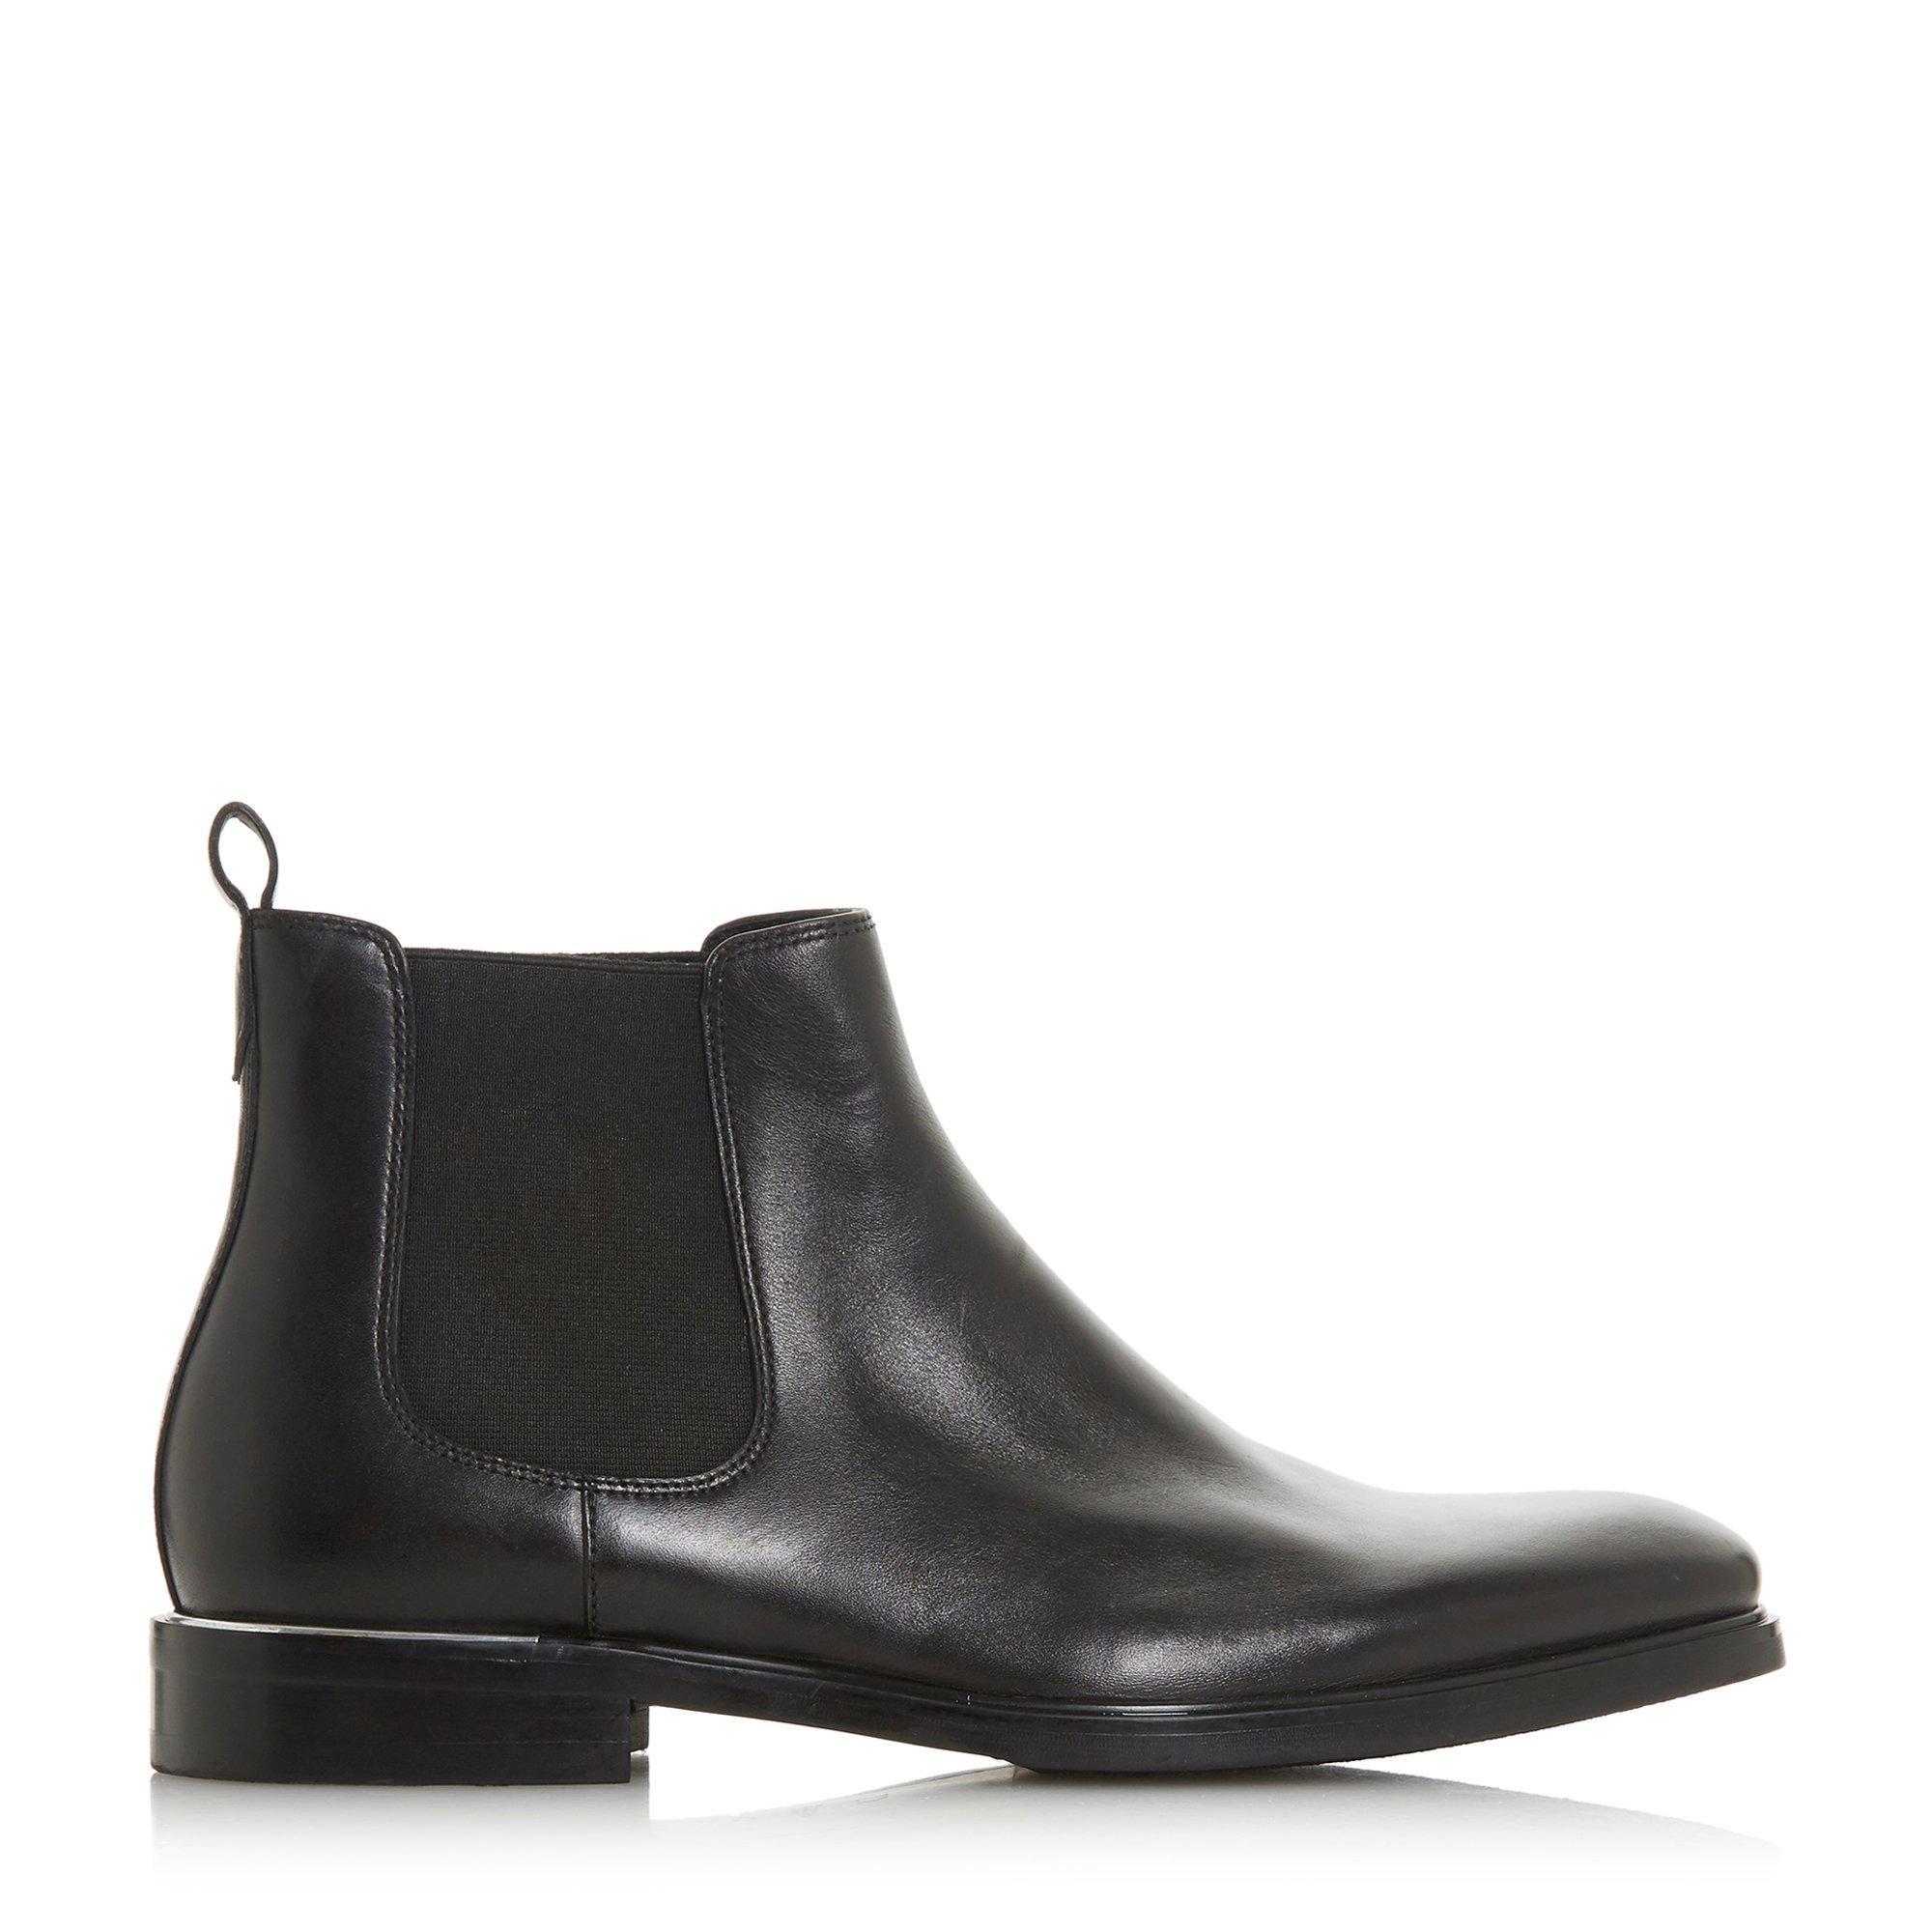 Dune Men's 'manchego' Chunky Sole Chelsea Boots in Black for Men - Lyst